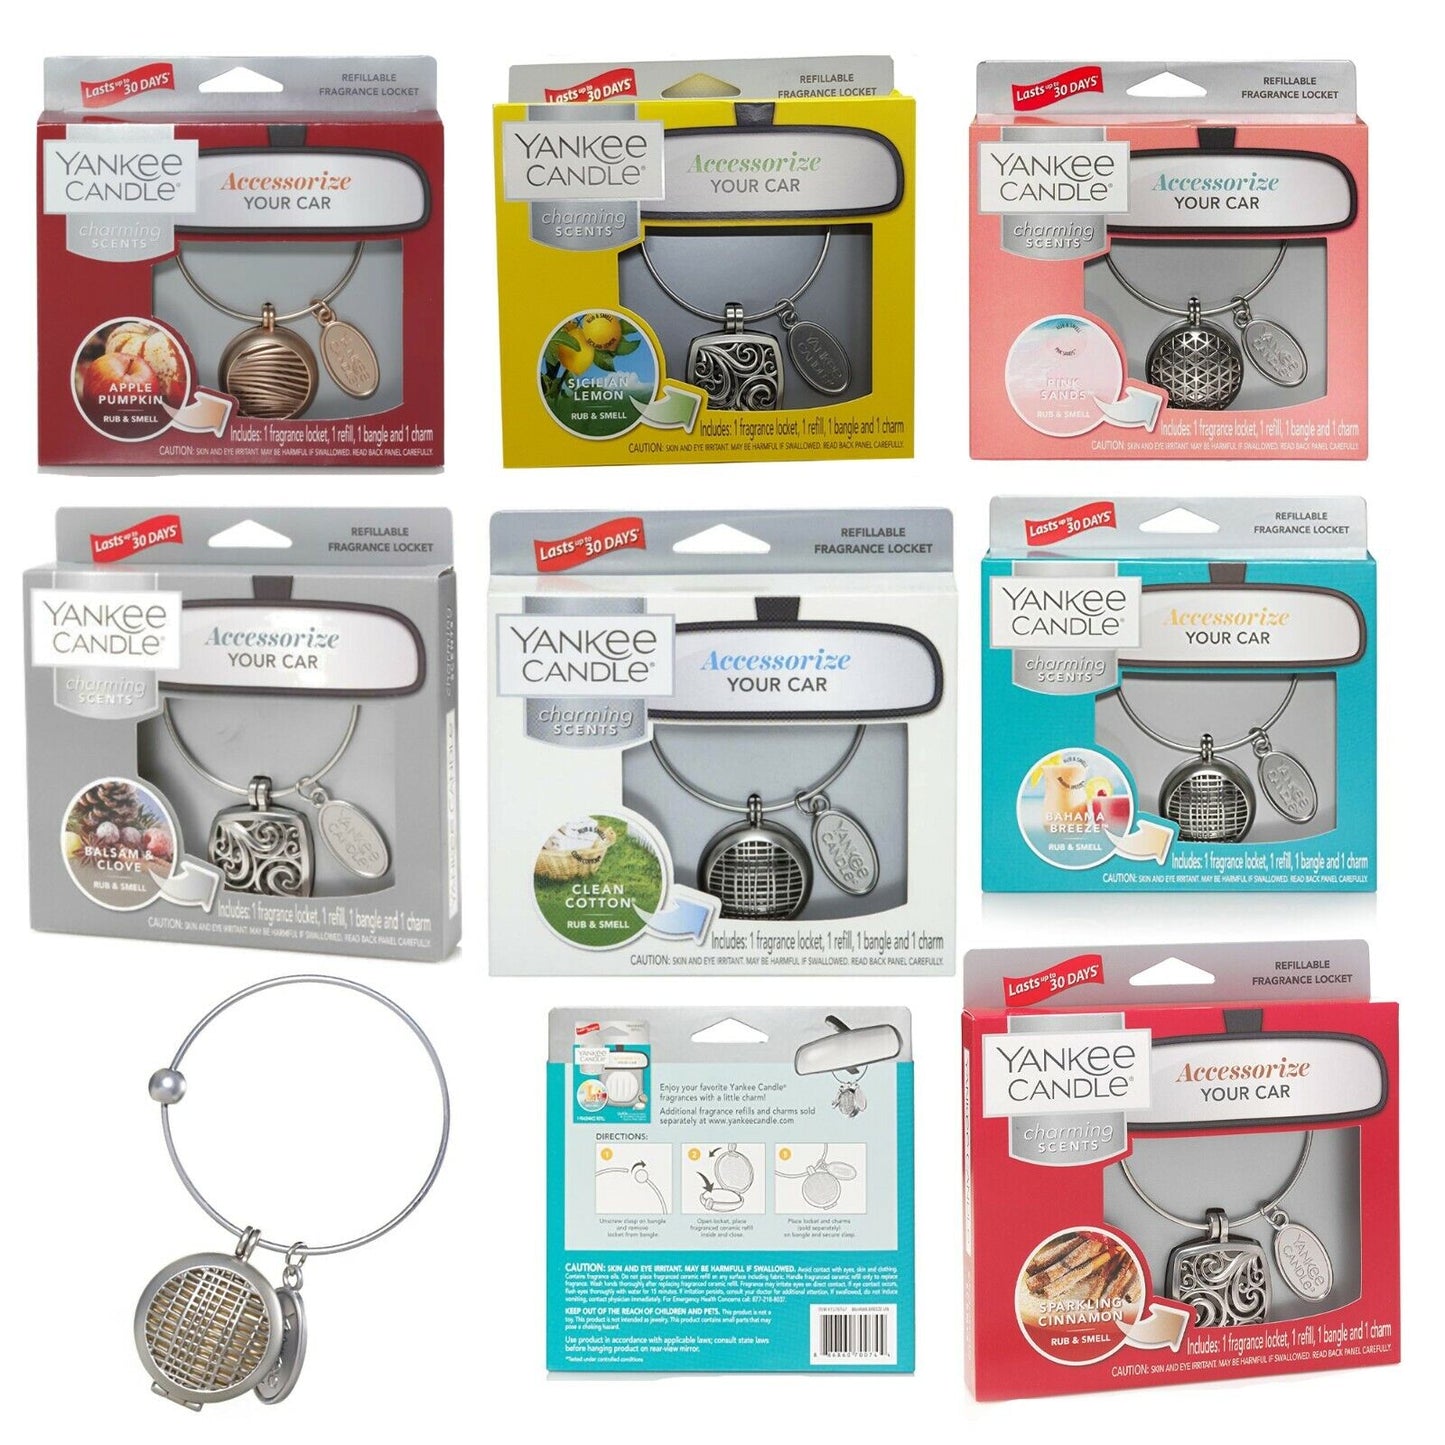 Yankee Candle Charms Charming Scents Car Air Freshener